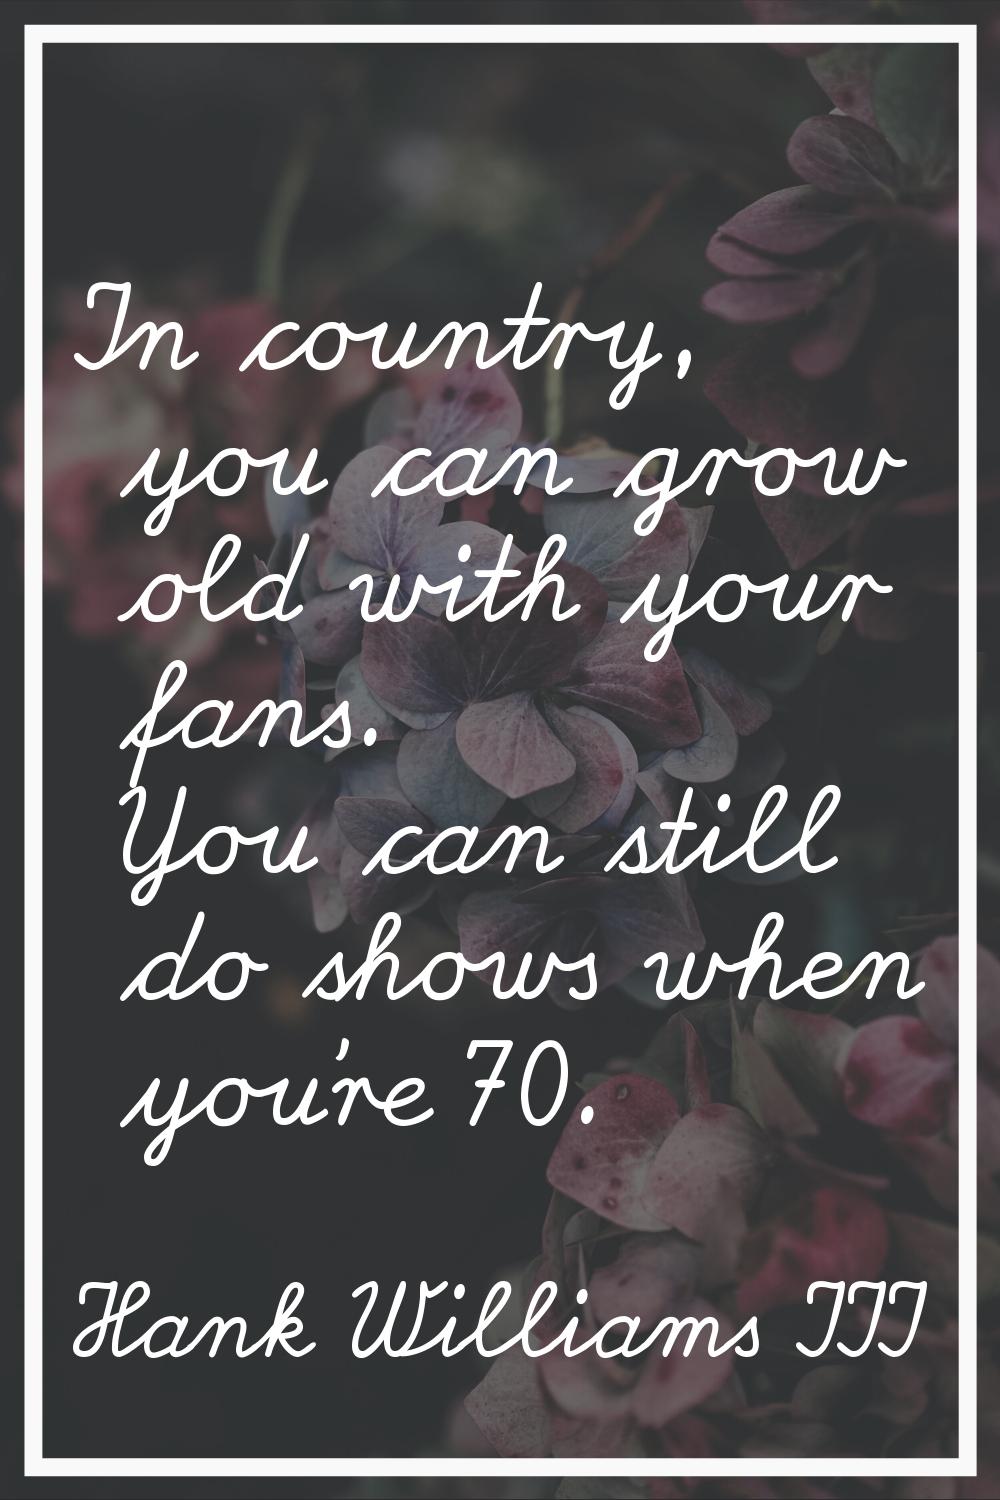 In country, you can grow old with your fans. You can still do shows when you're 70.